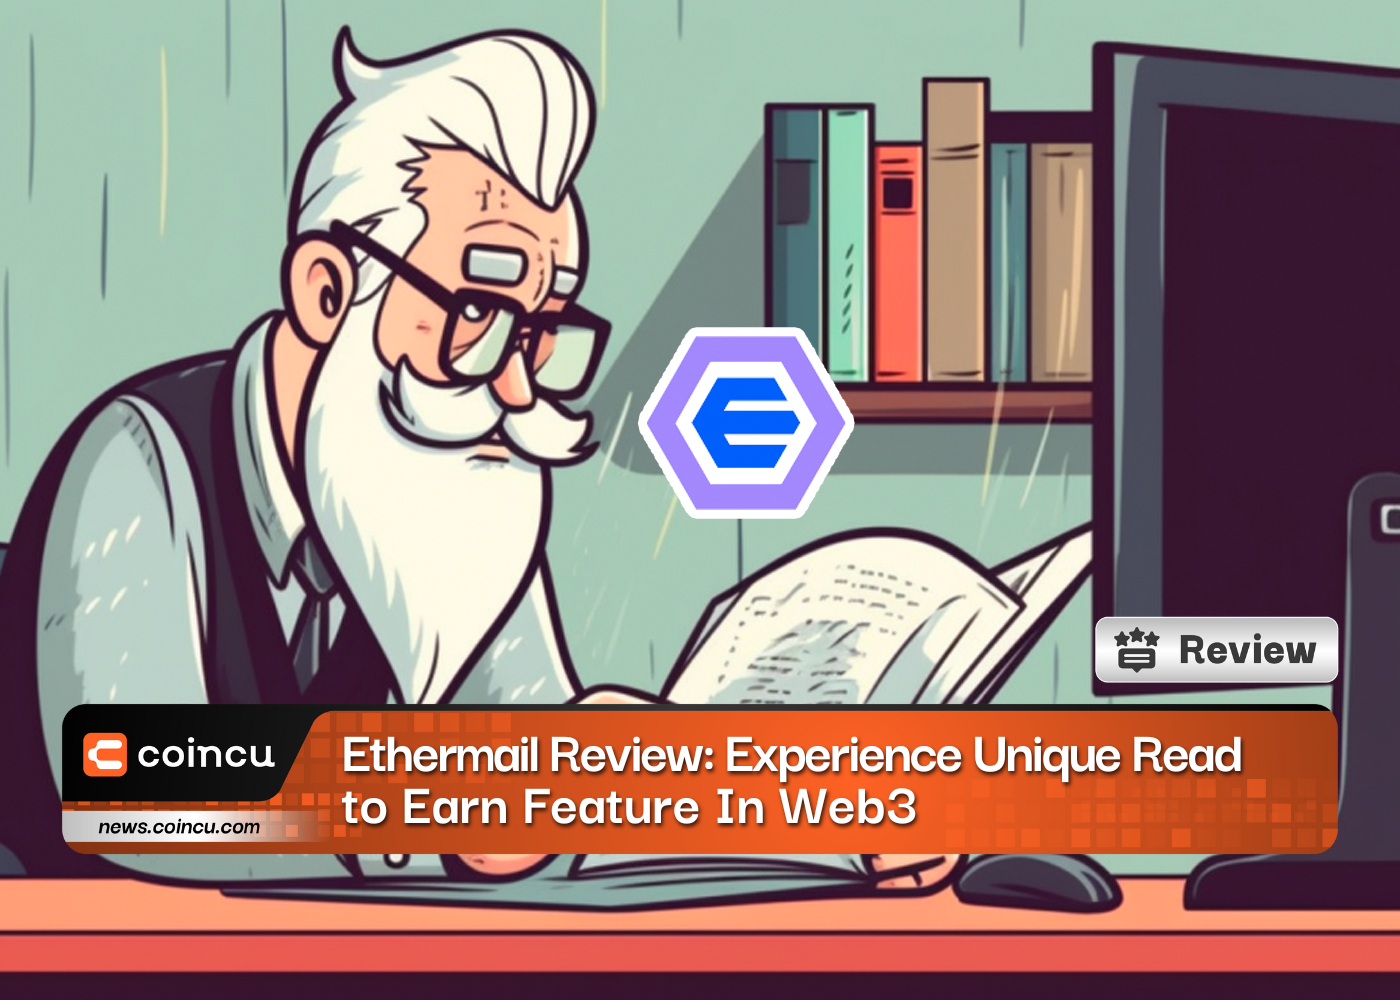 Ethermail Review: Experience Unique Read to Earn Feature In Web3